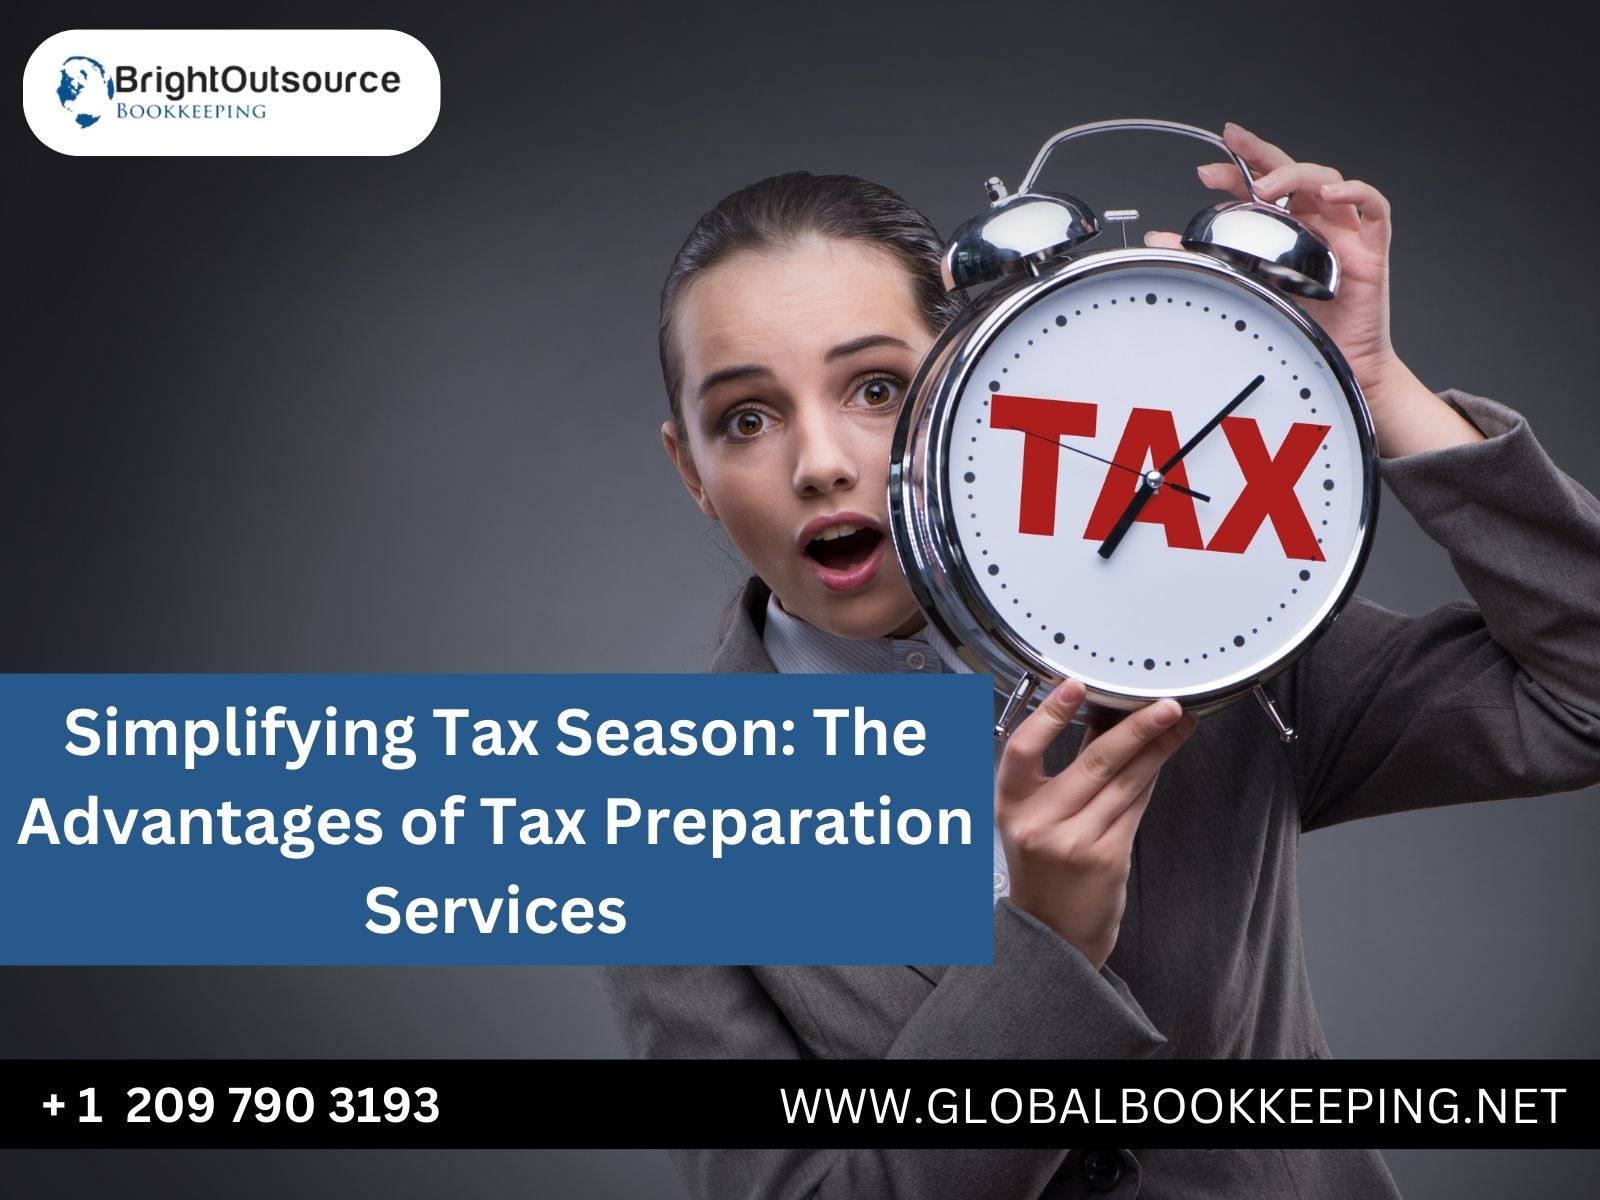 Simplifying Tax Season: The Advantages of Tax Preparation Services